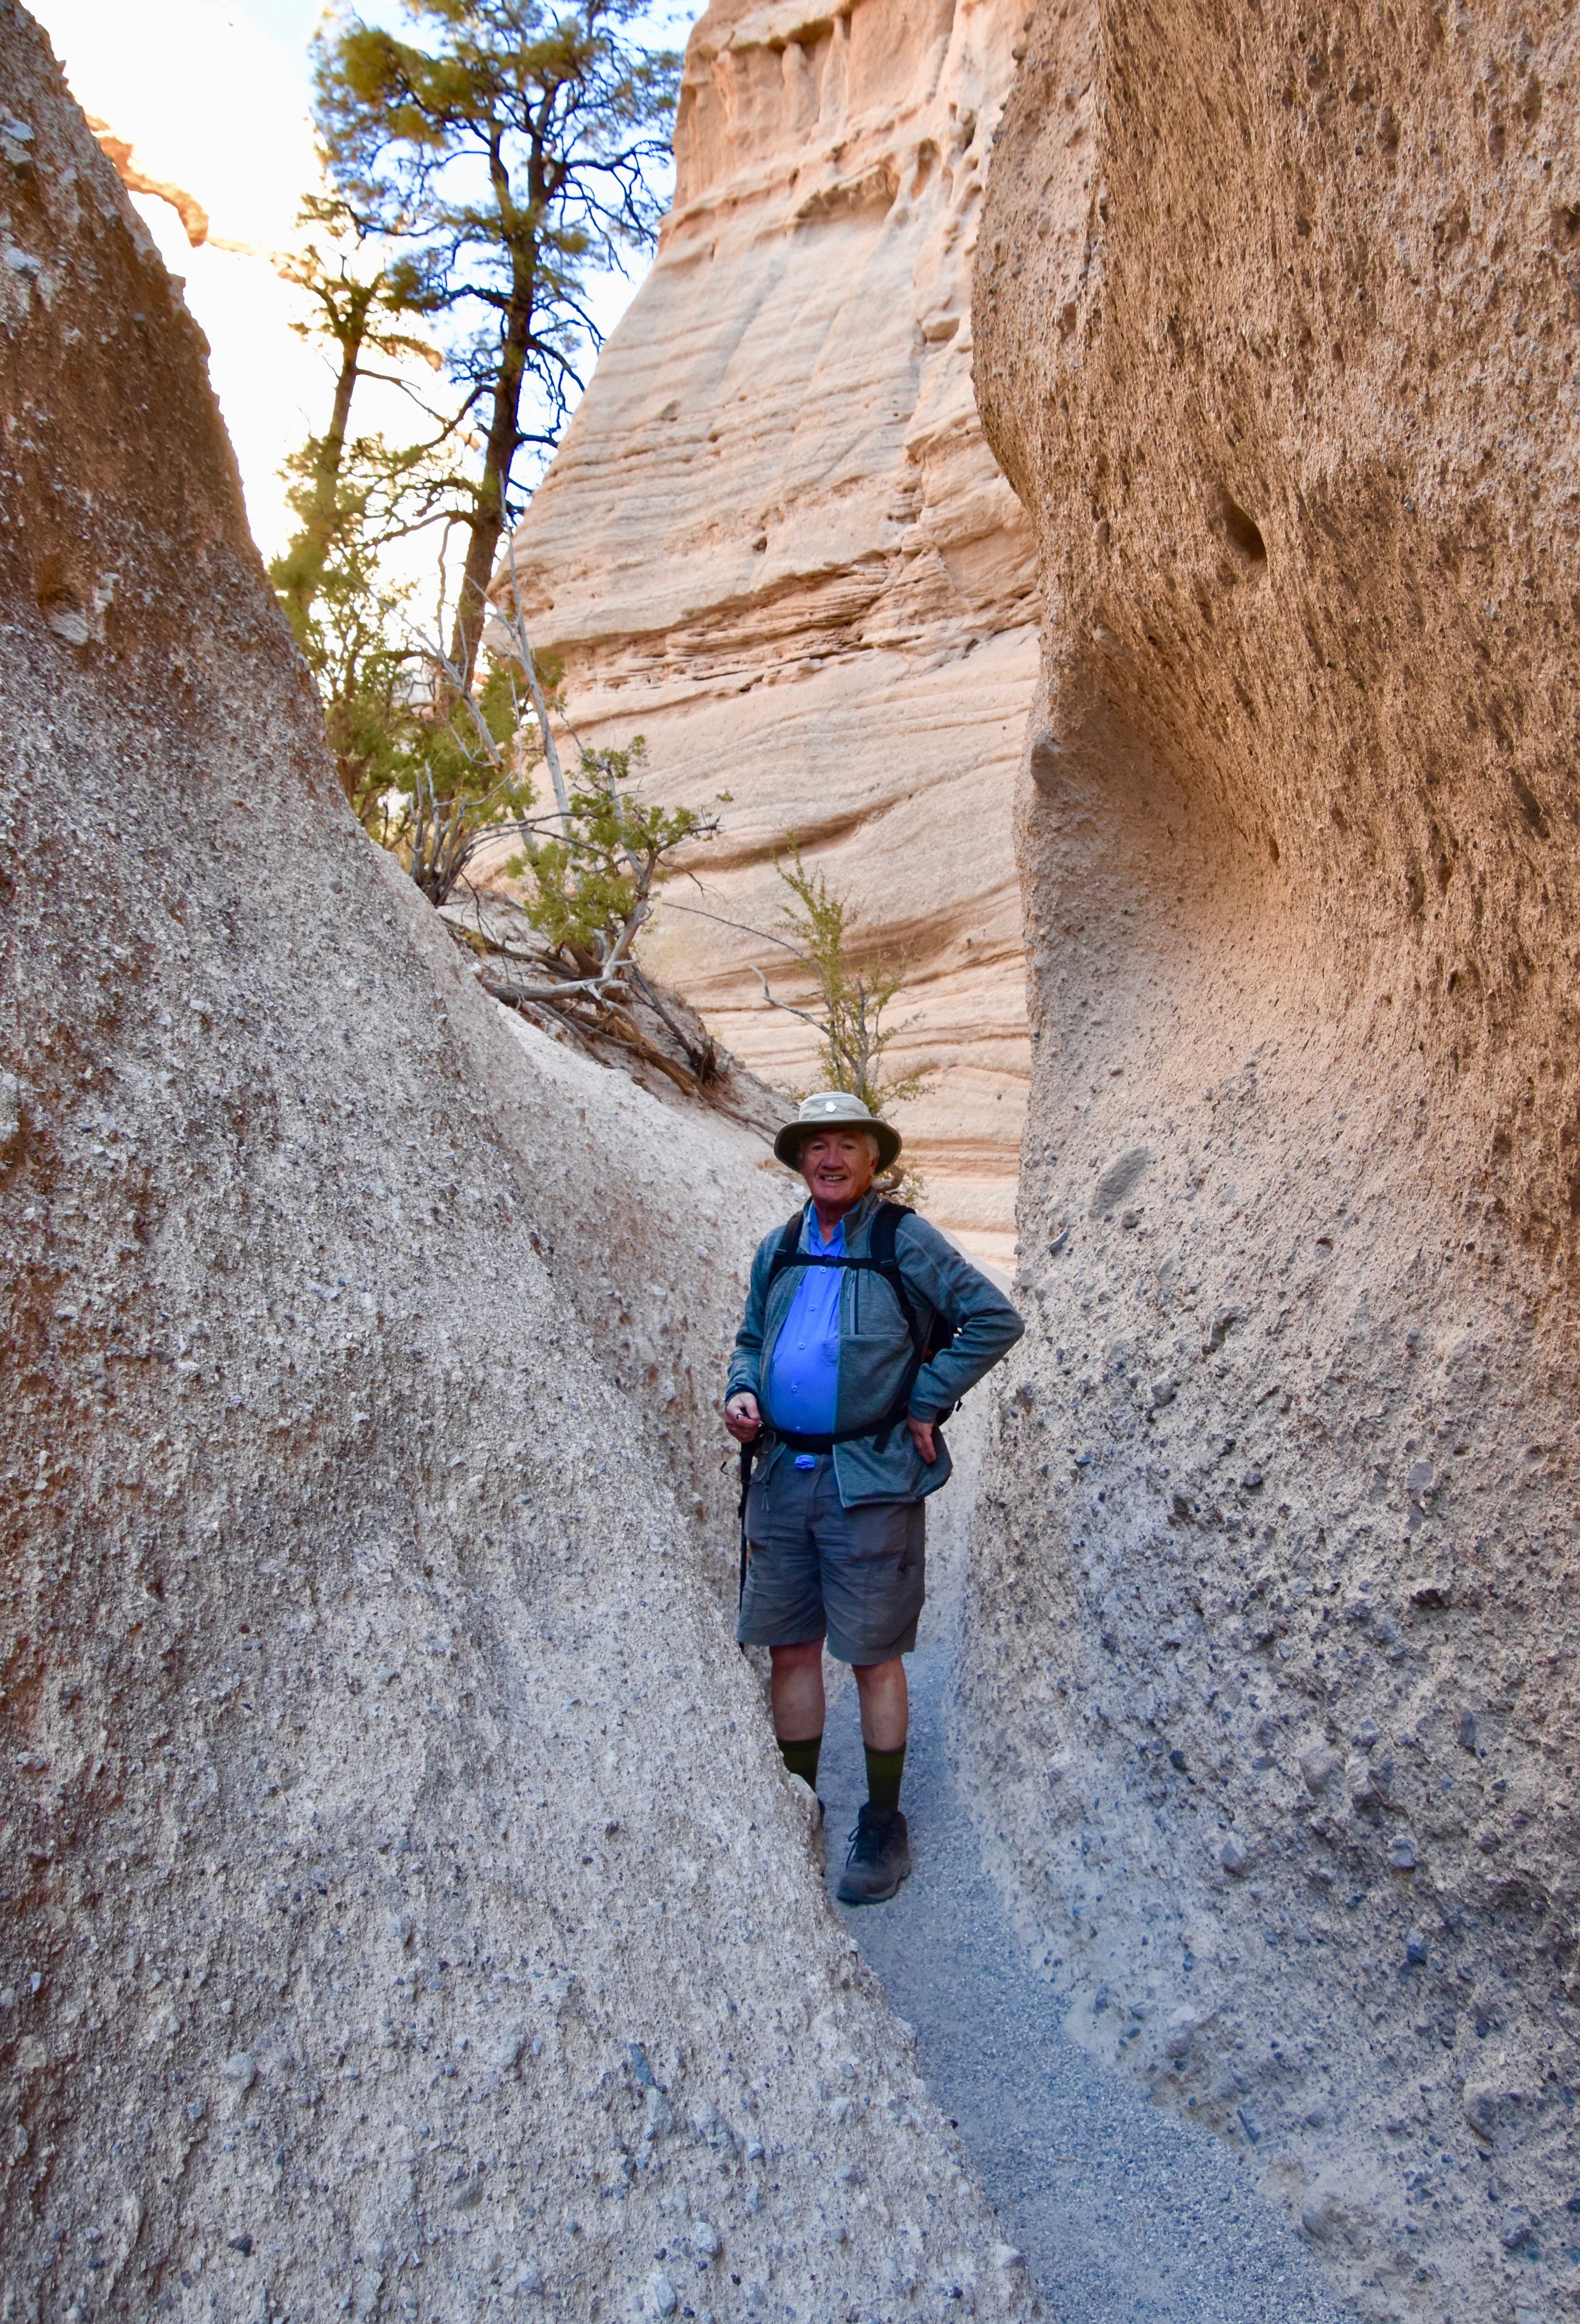 Inside the Slot Canyon at Tent Rocks